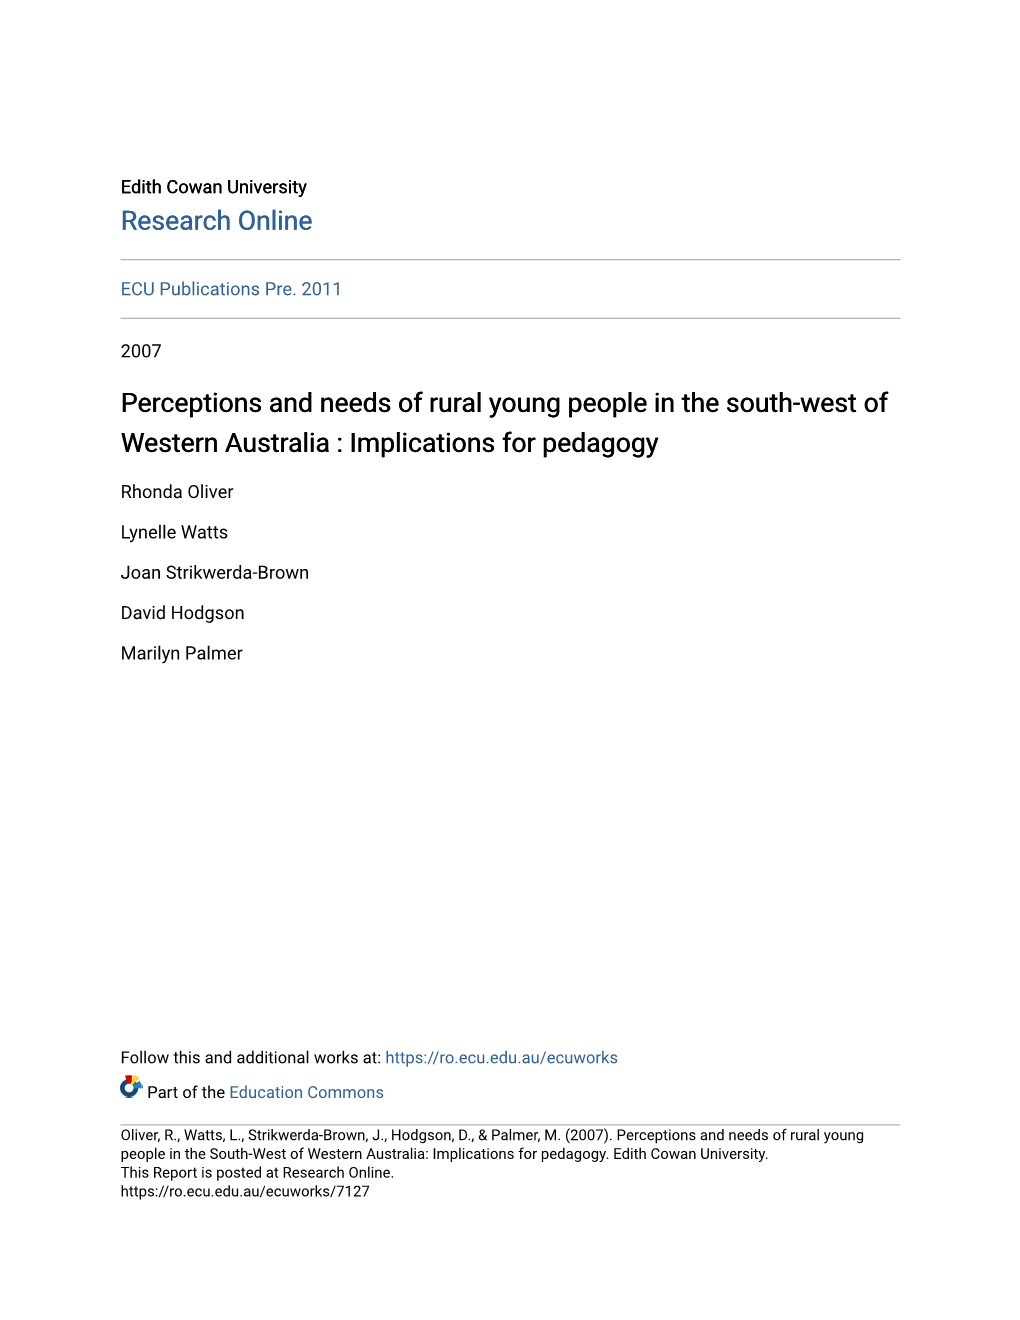 Perceptions and Needs of Rural Young People in the South-West of Western Australia : Implications for Pedagogy